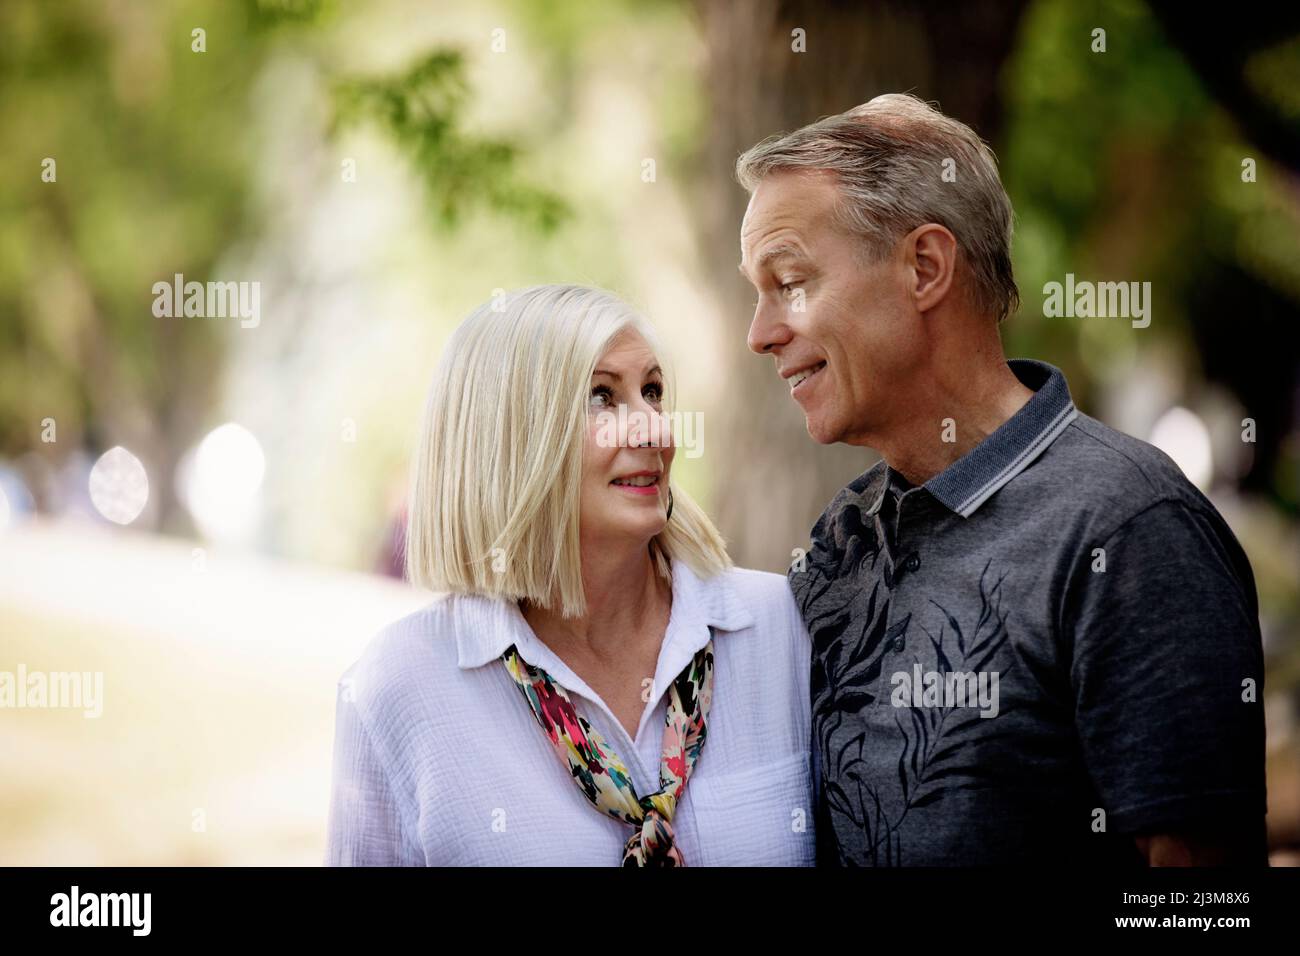 Outdoor portrait of a mature couple in a park as they stand and look at each other; Edmonton, Alberta, Canada Stock Photo